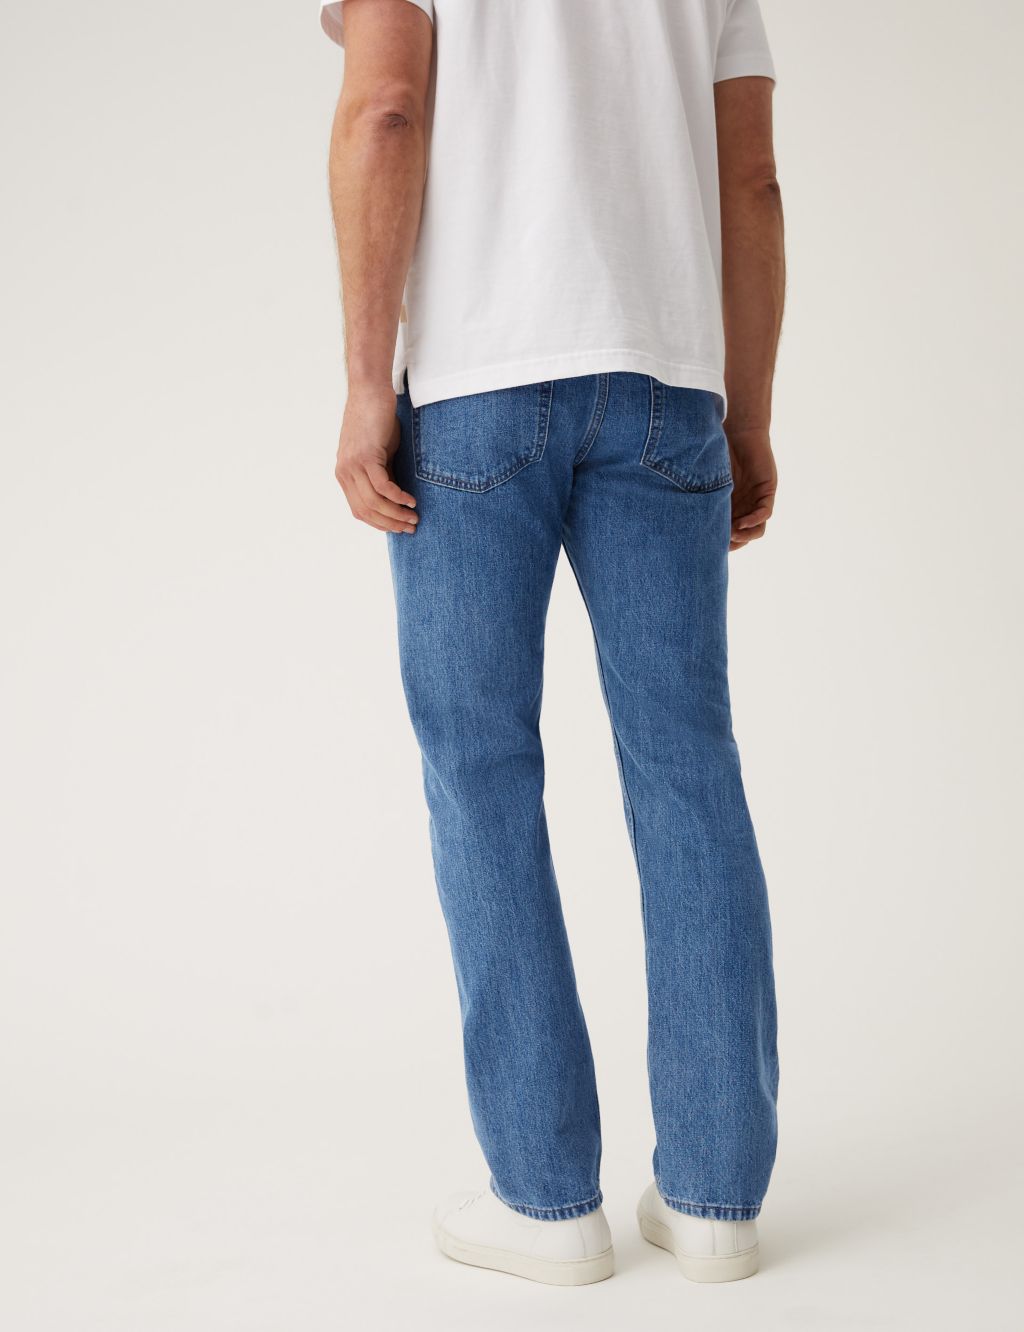 Big & Tall Straight Fit Pure Cotton Jeans image 3